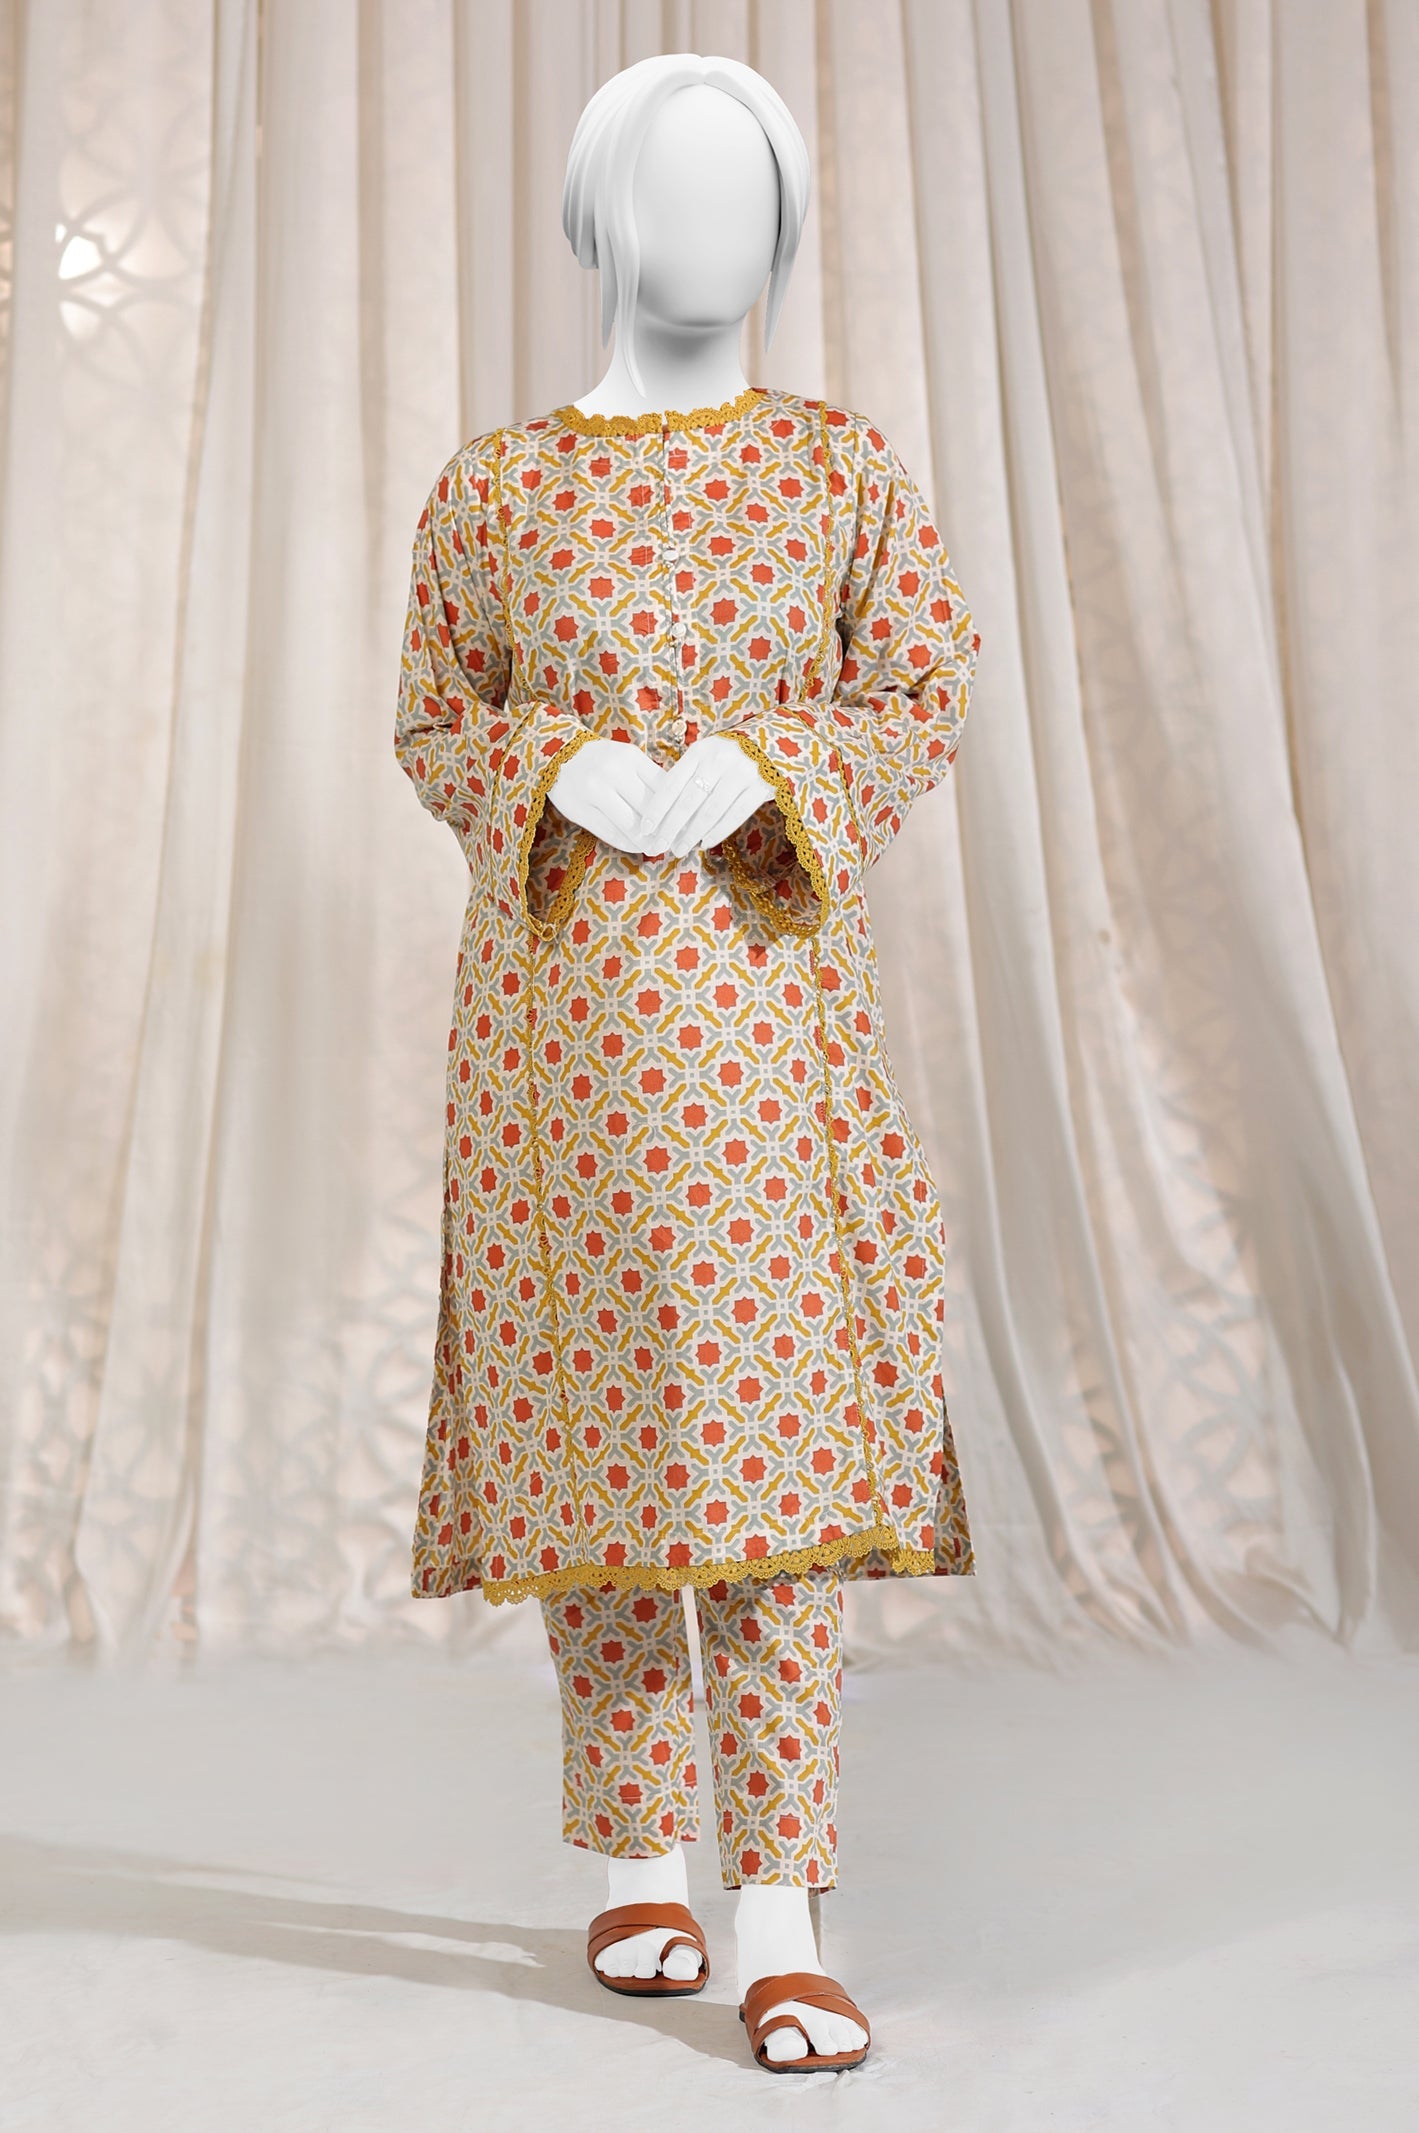 2PC Printed Lawn Fawn Suit - Diners